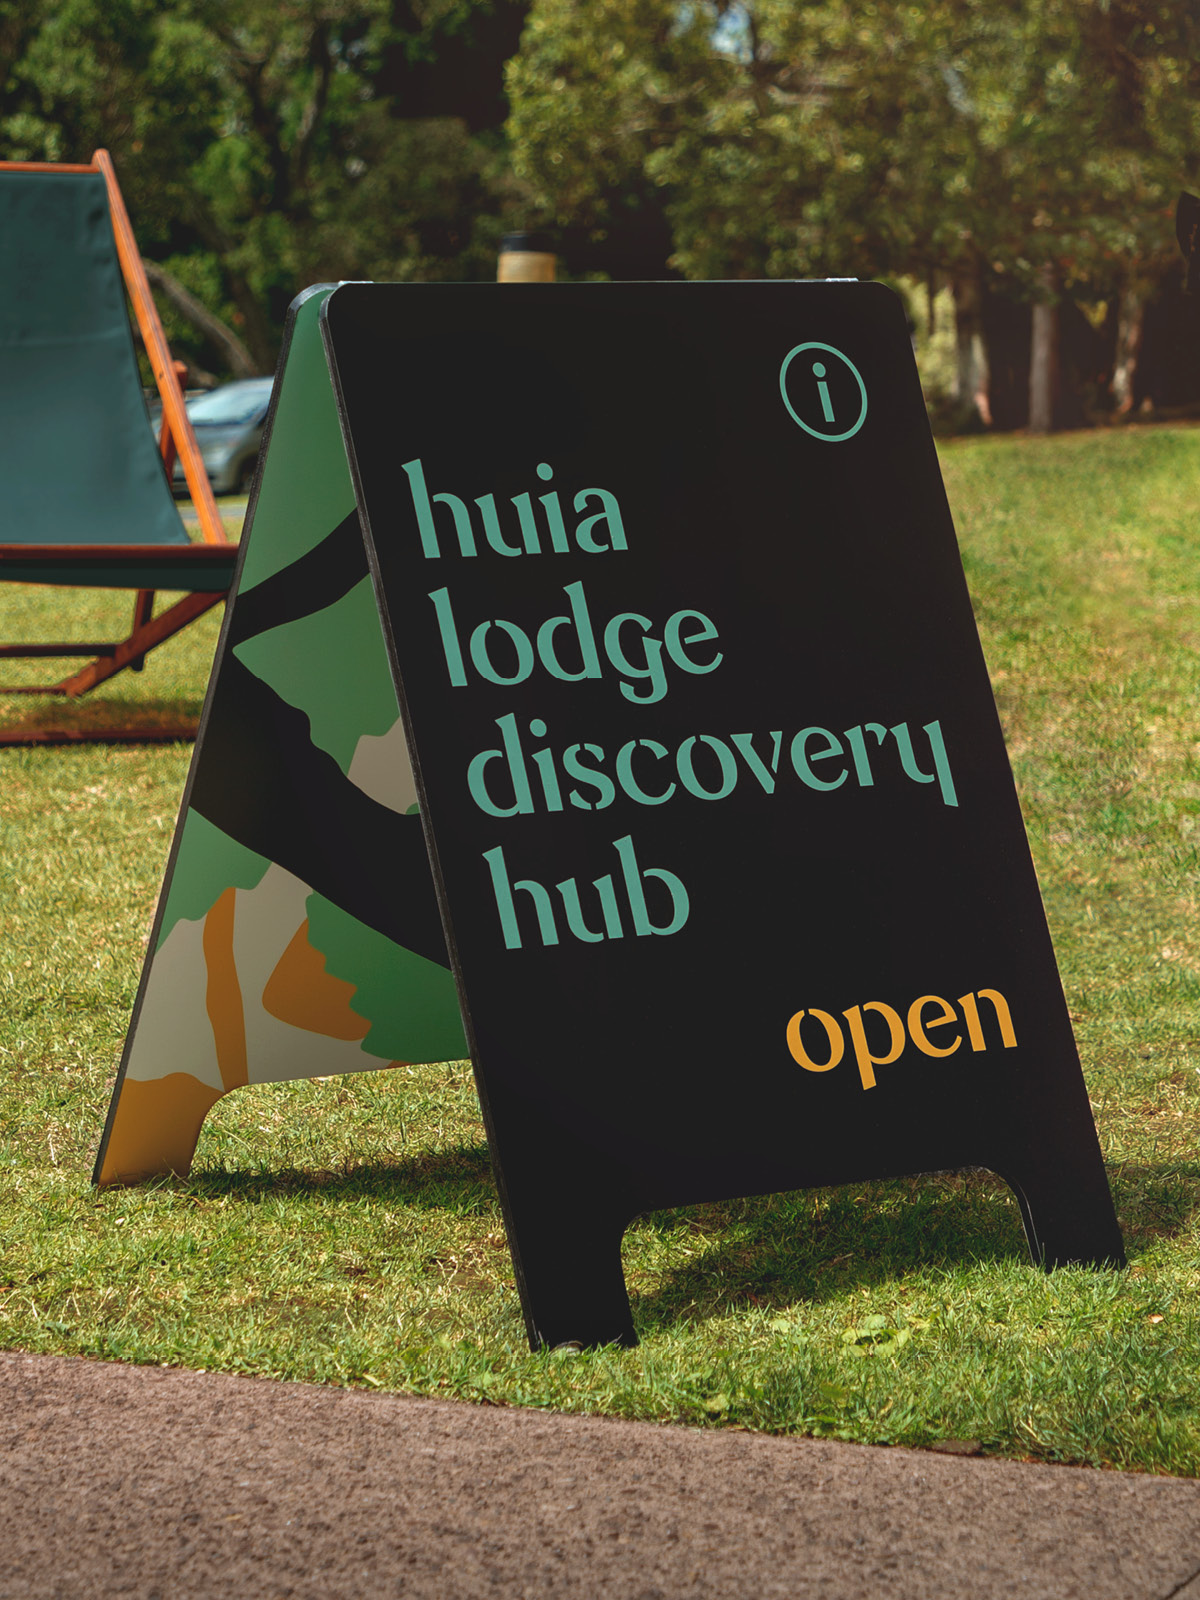 Open sign for Huia loadge discovery hub